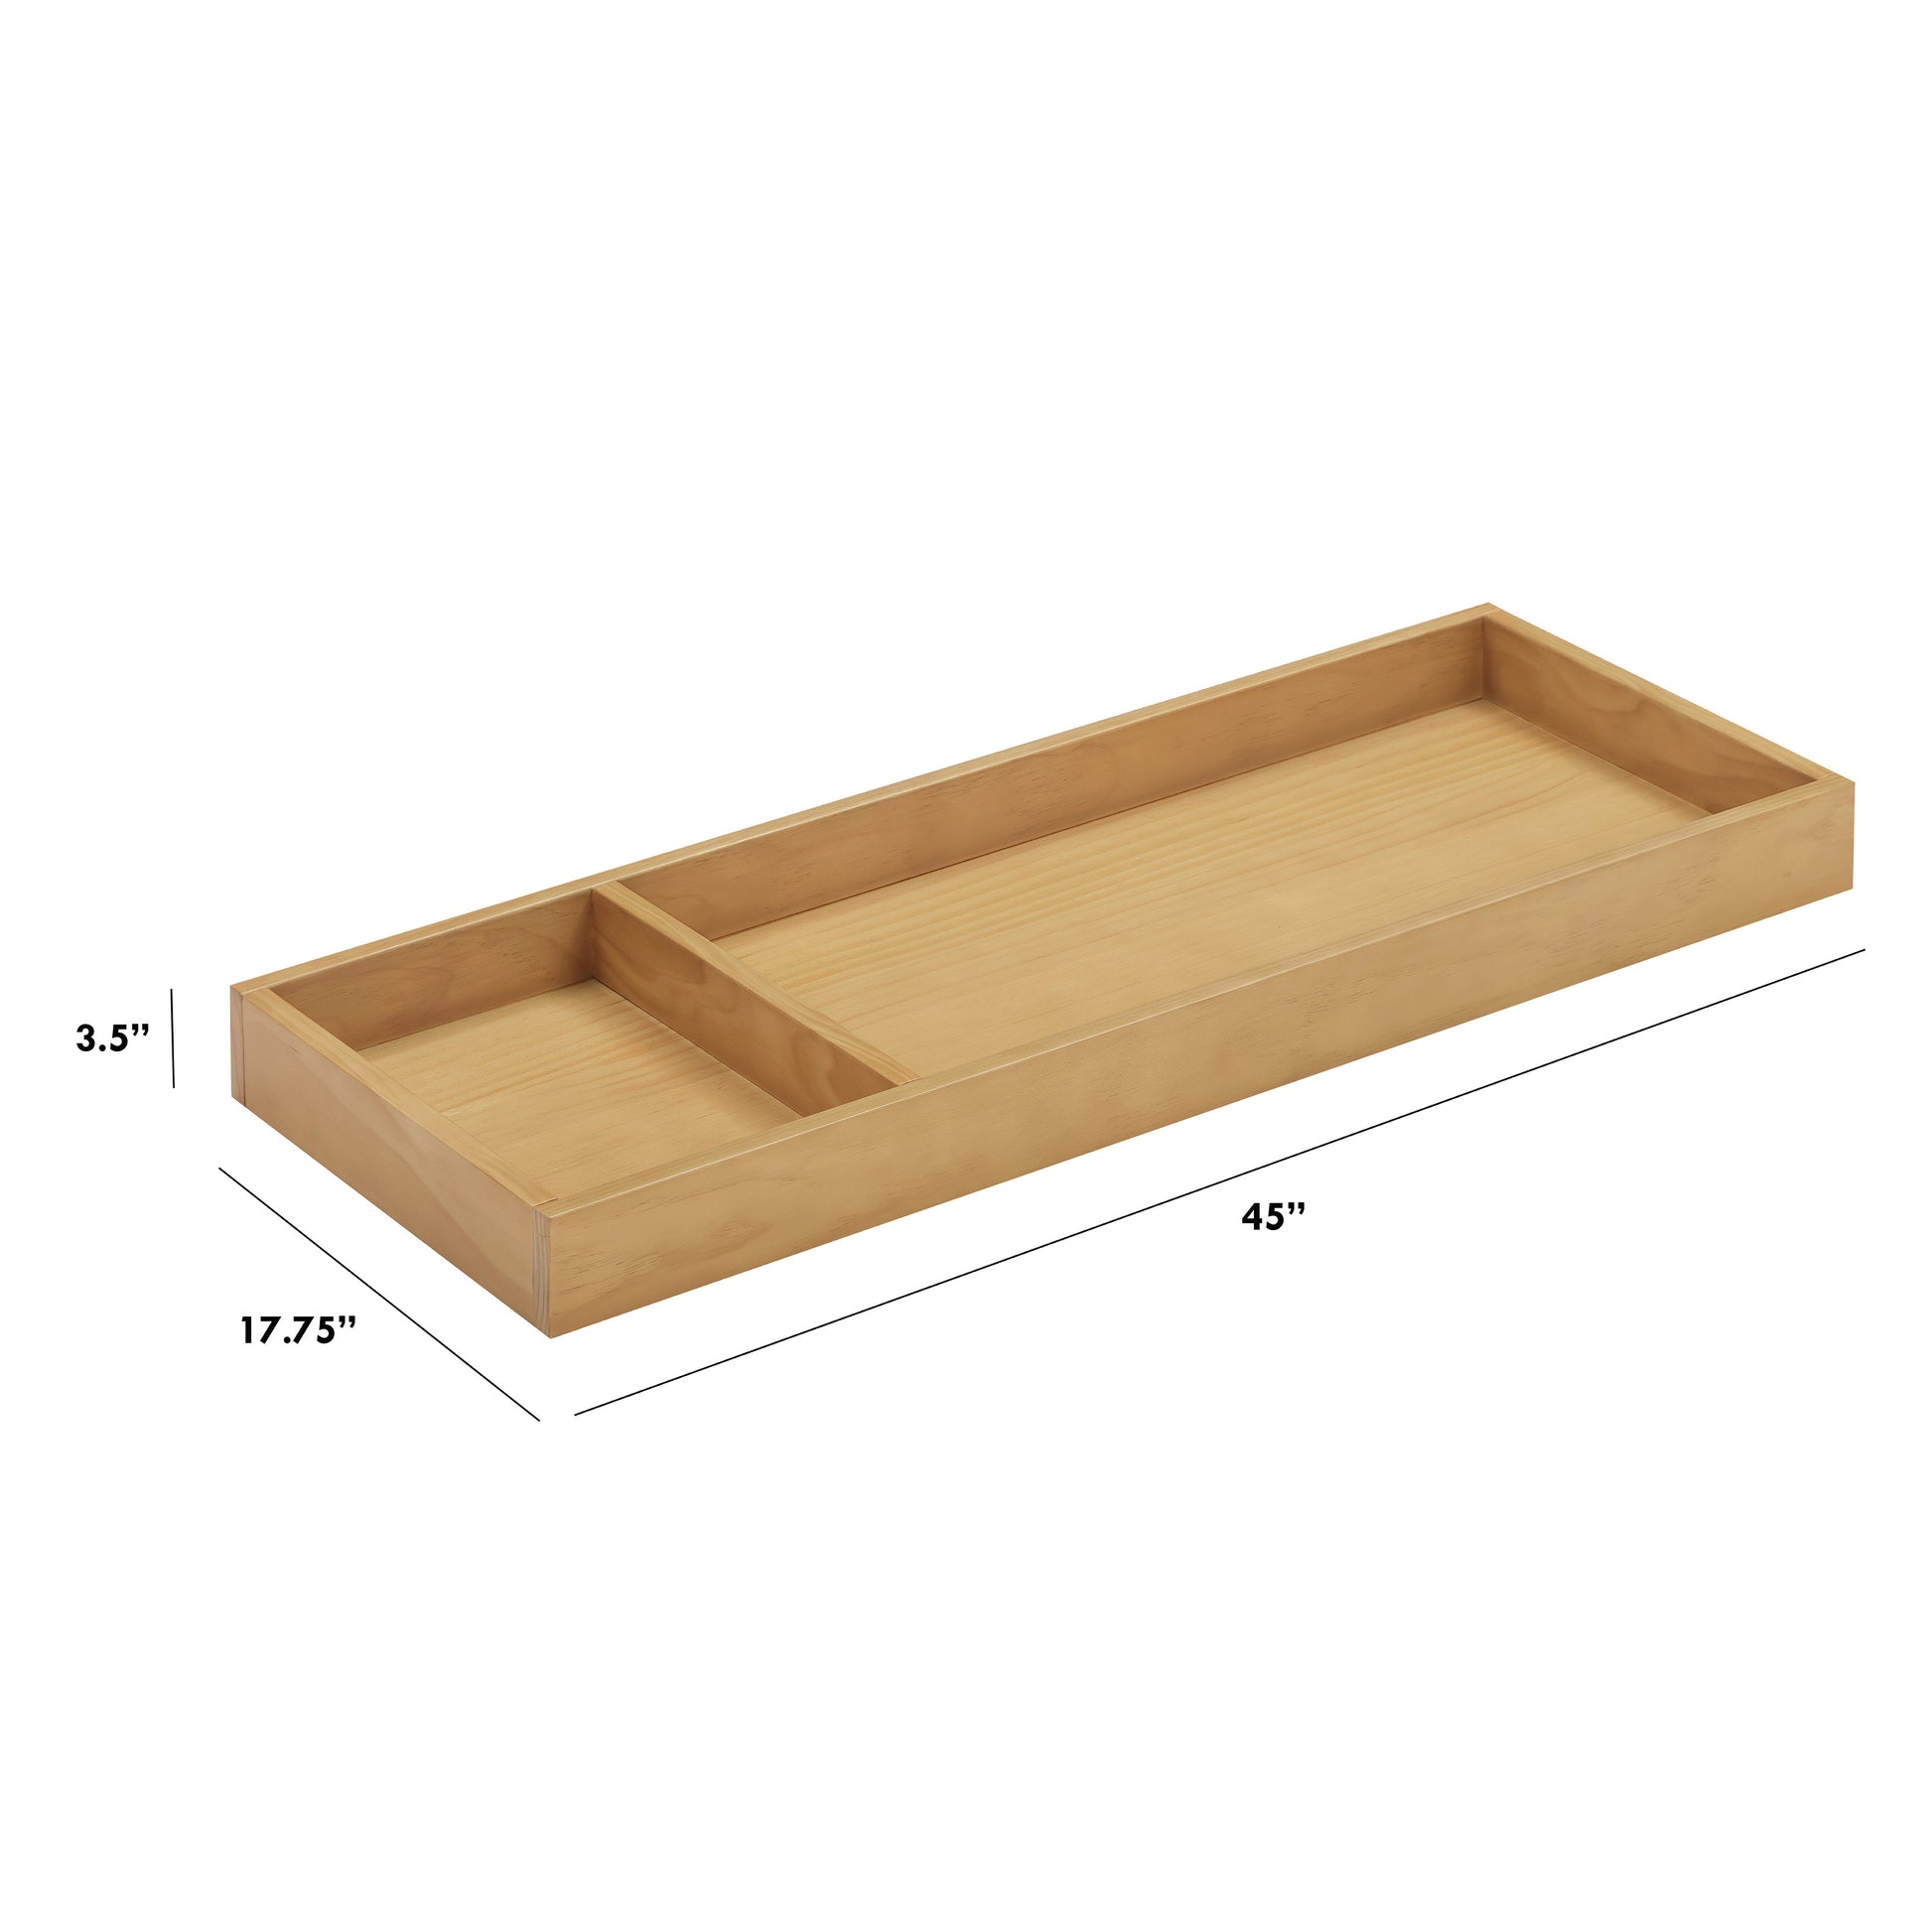 M0619HY,Universal Wide Removable Changing Tray in Honey